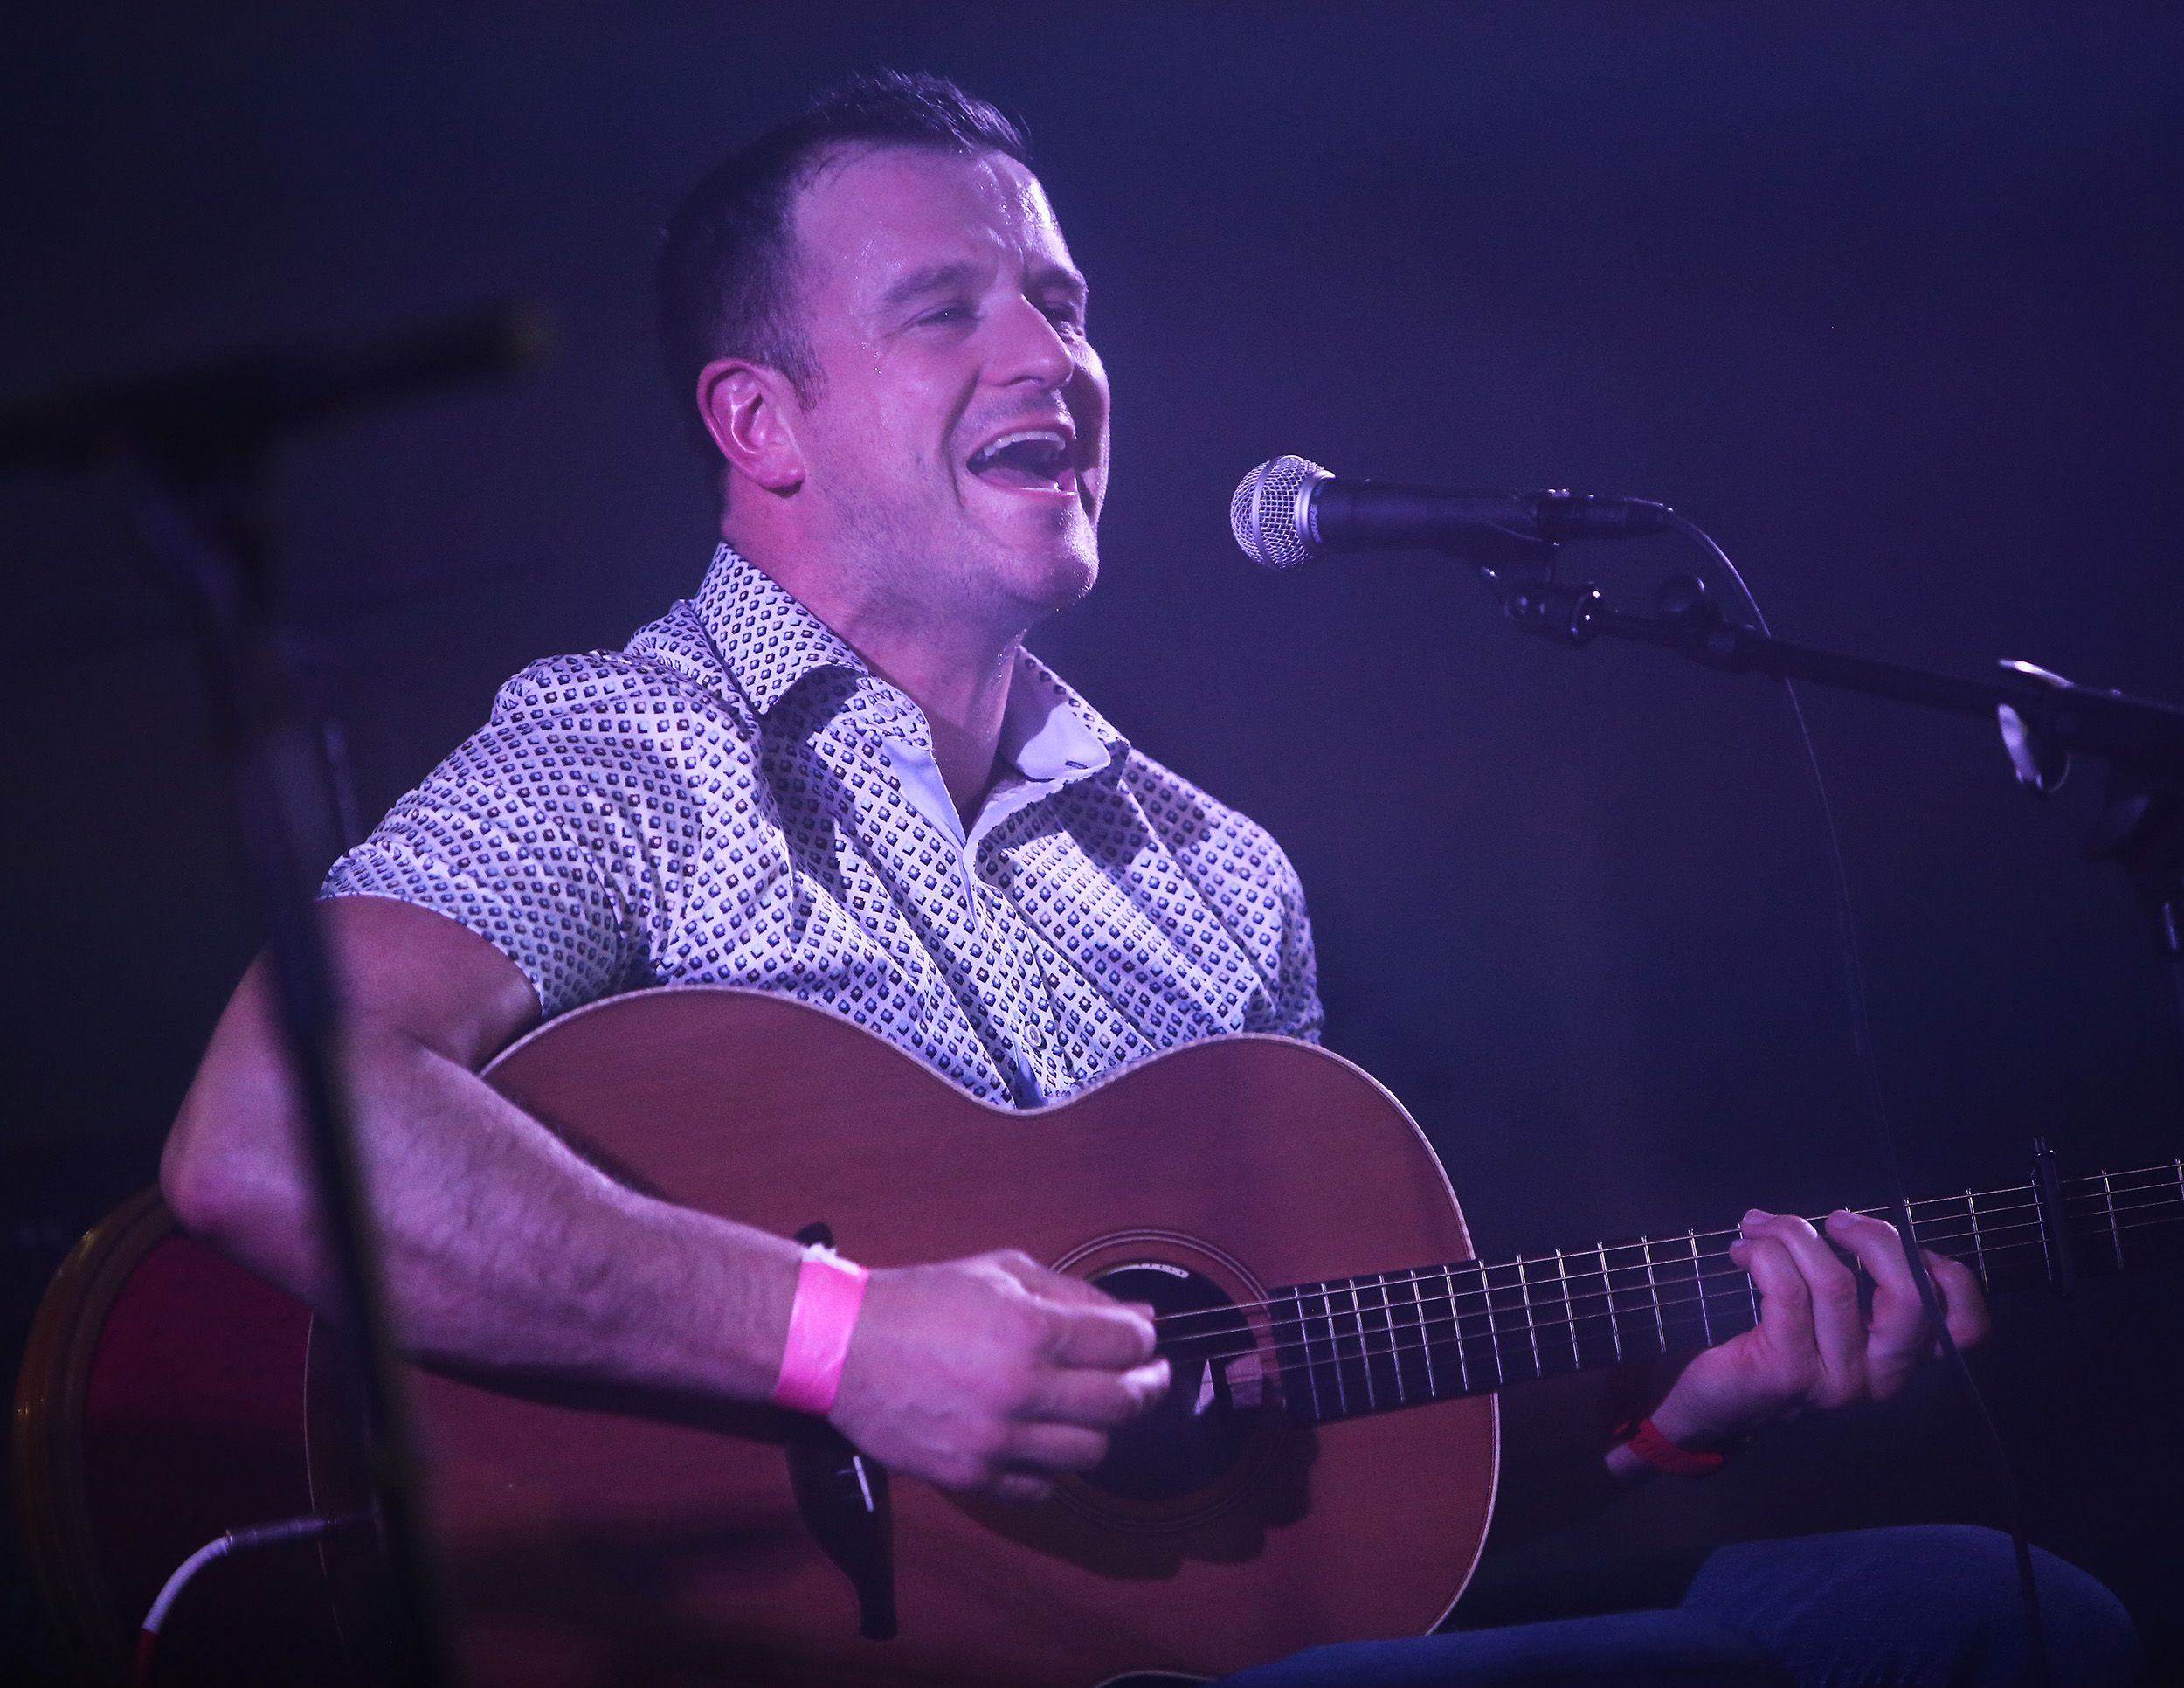 OVERJOYED: Local musician Brendan Quinn has expressed his delight after his music video was shown of UTV Life 